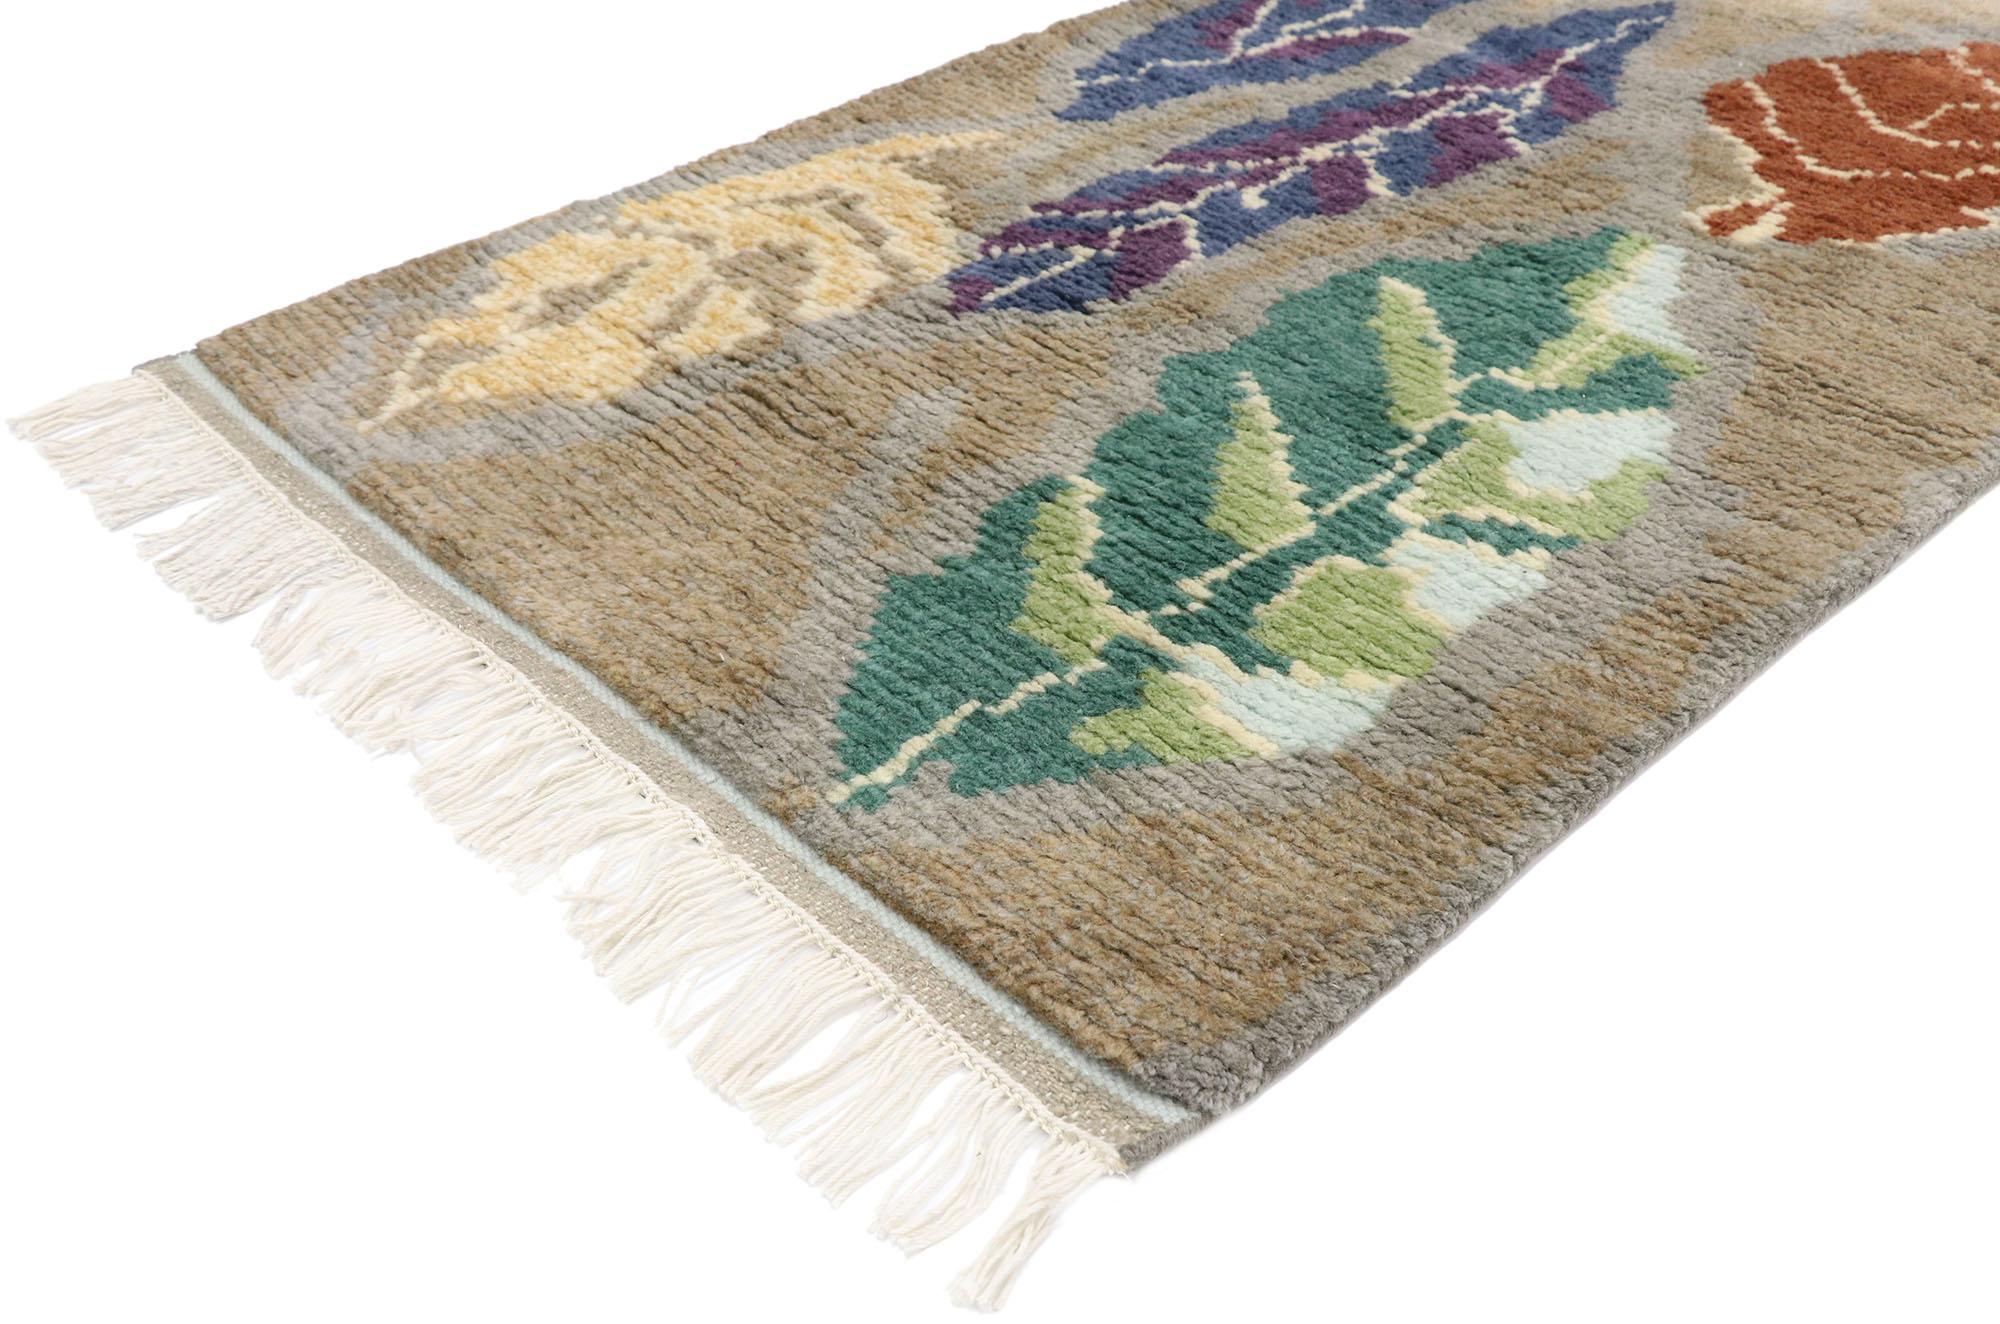 30644, new contemporary Moroccan style rug with biophilic Scandinavian Modern Design. Reflecting elements of nature, this hand-knotted wool contemporary Moroccan style rug awakens the soul with elevated Biophilic Design. The contemporary Moroccan